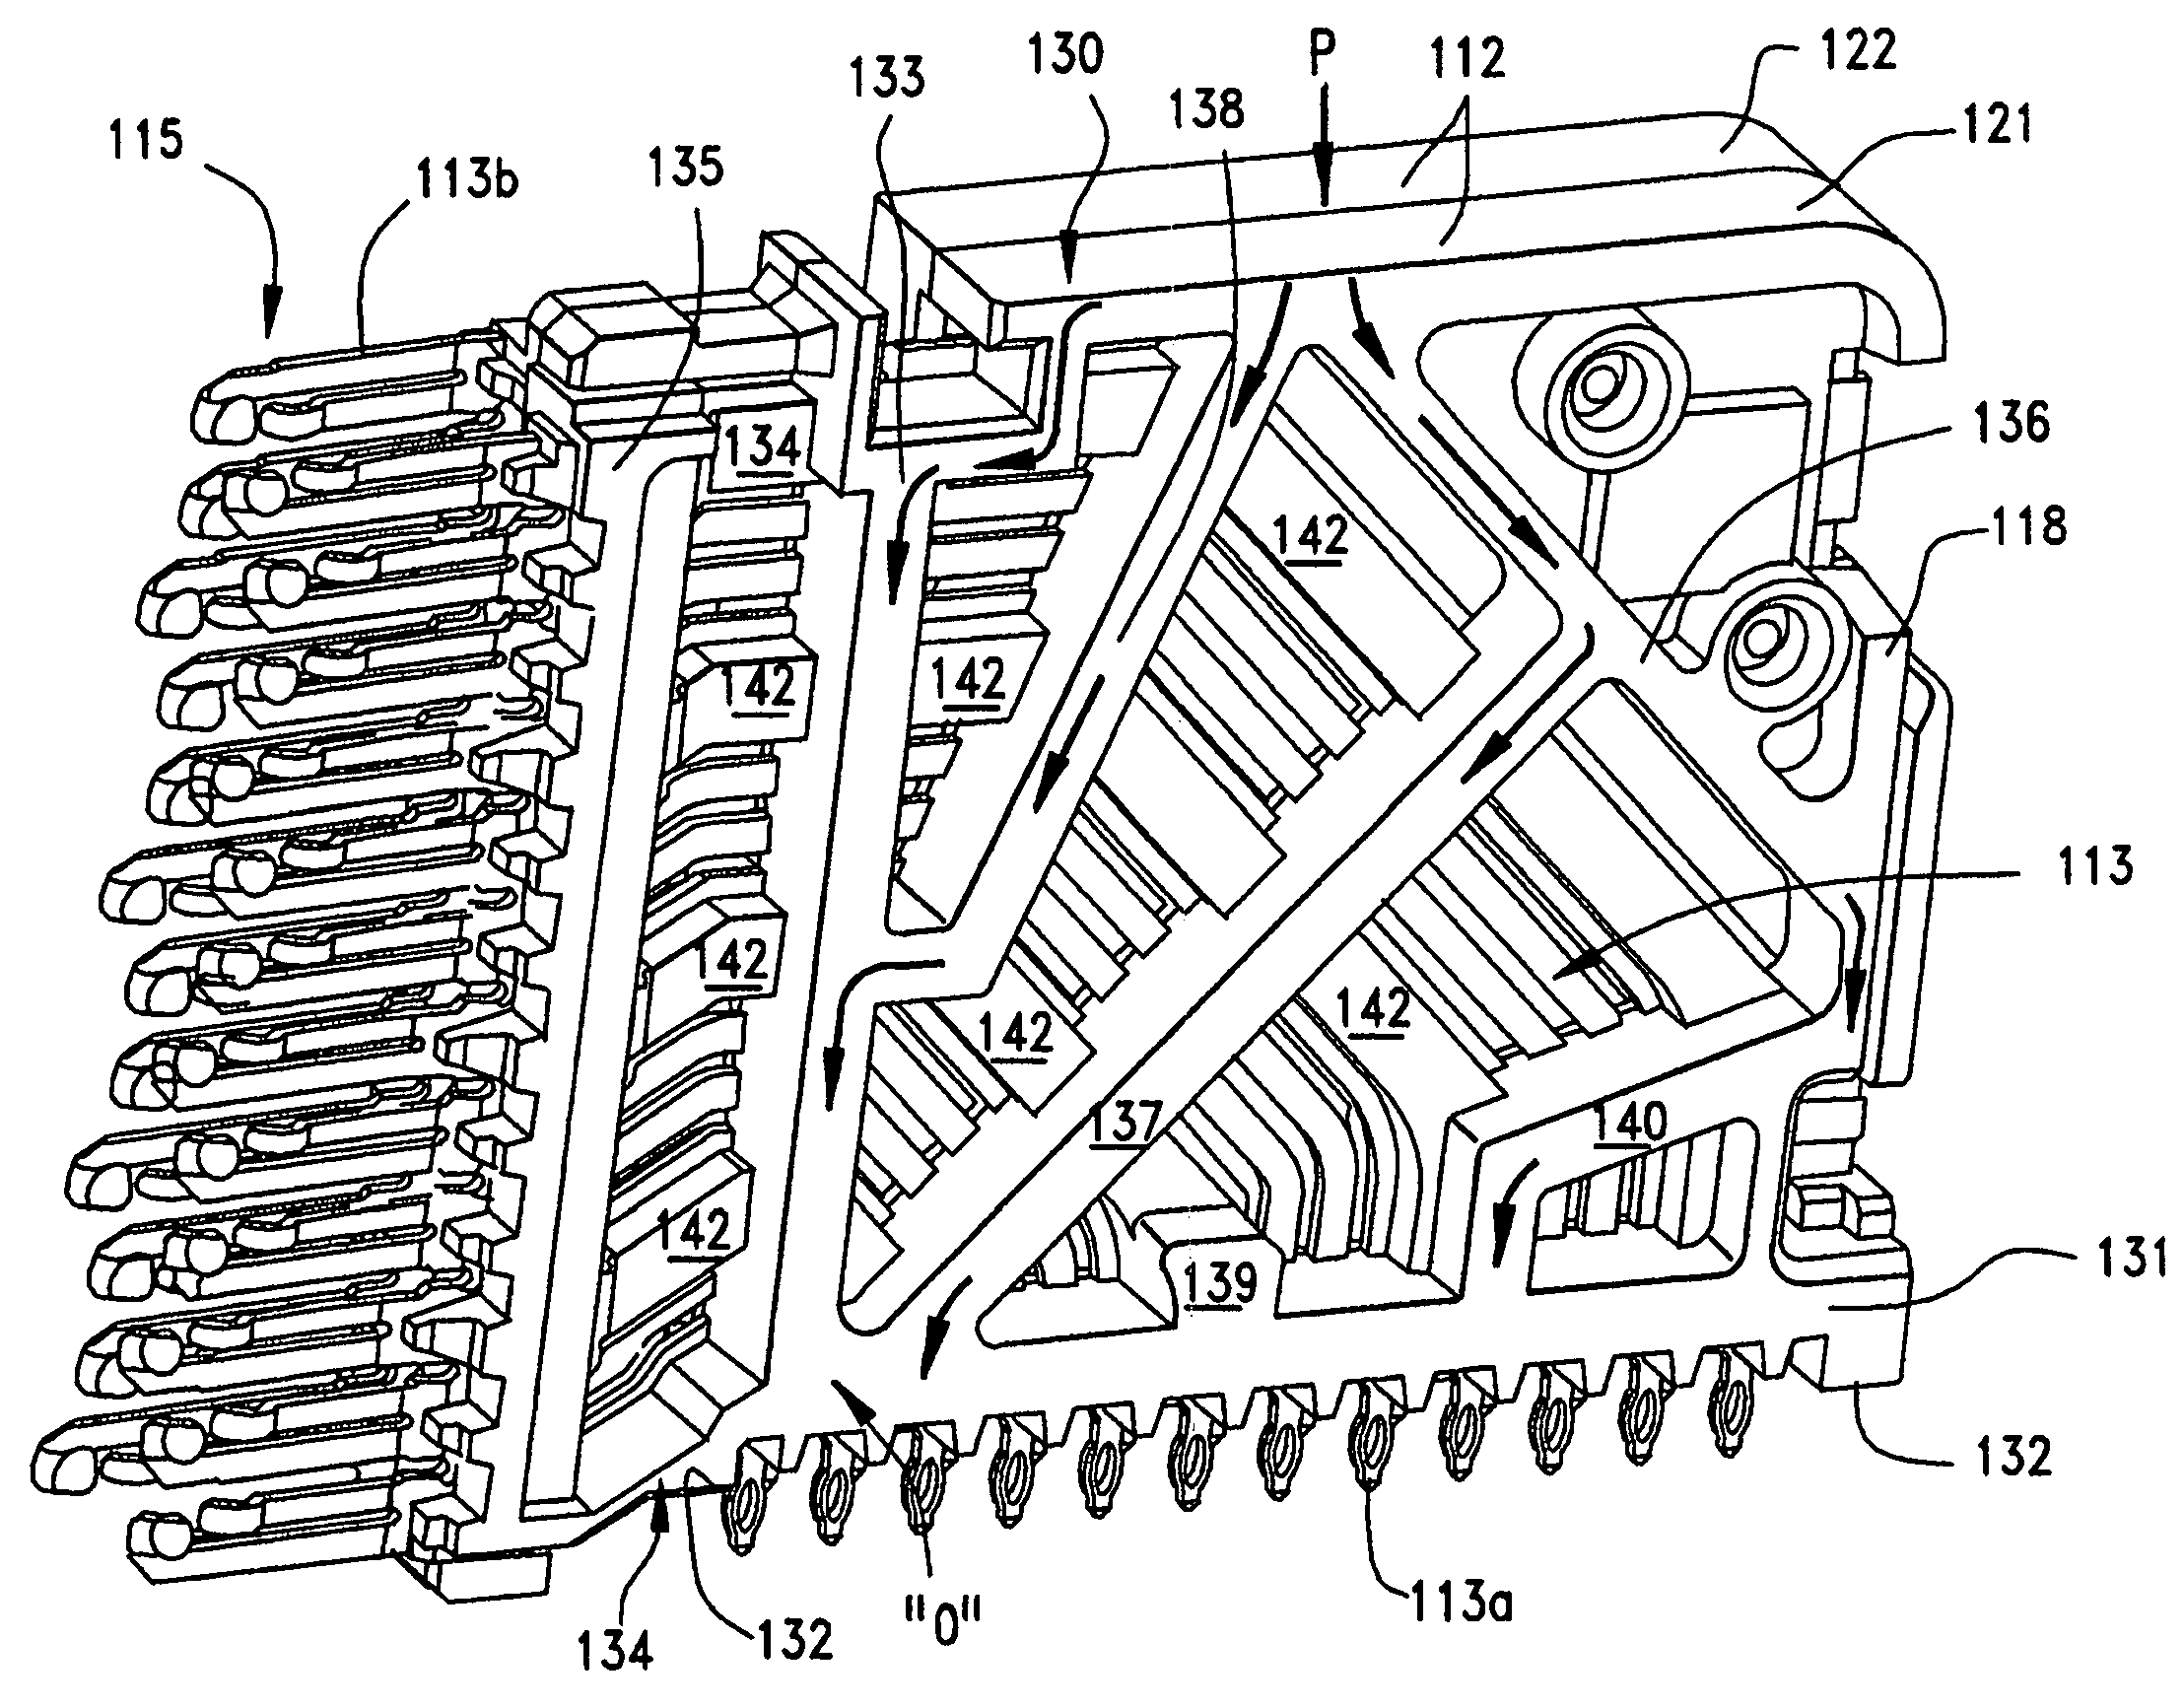 Short length compliant pin, particularly suitable with backplane connectors